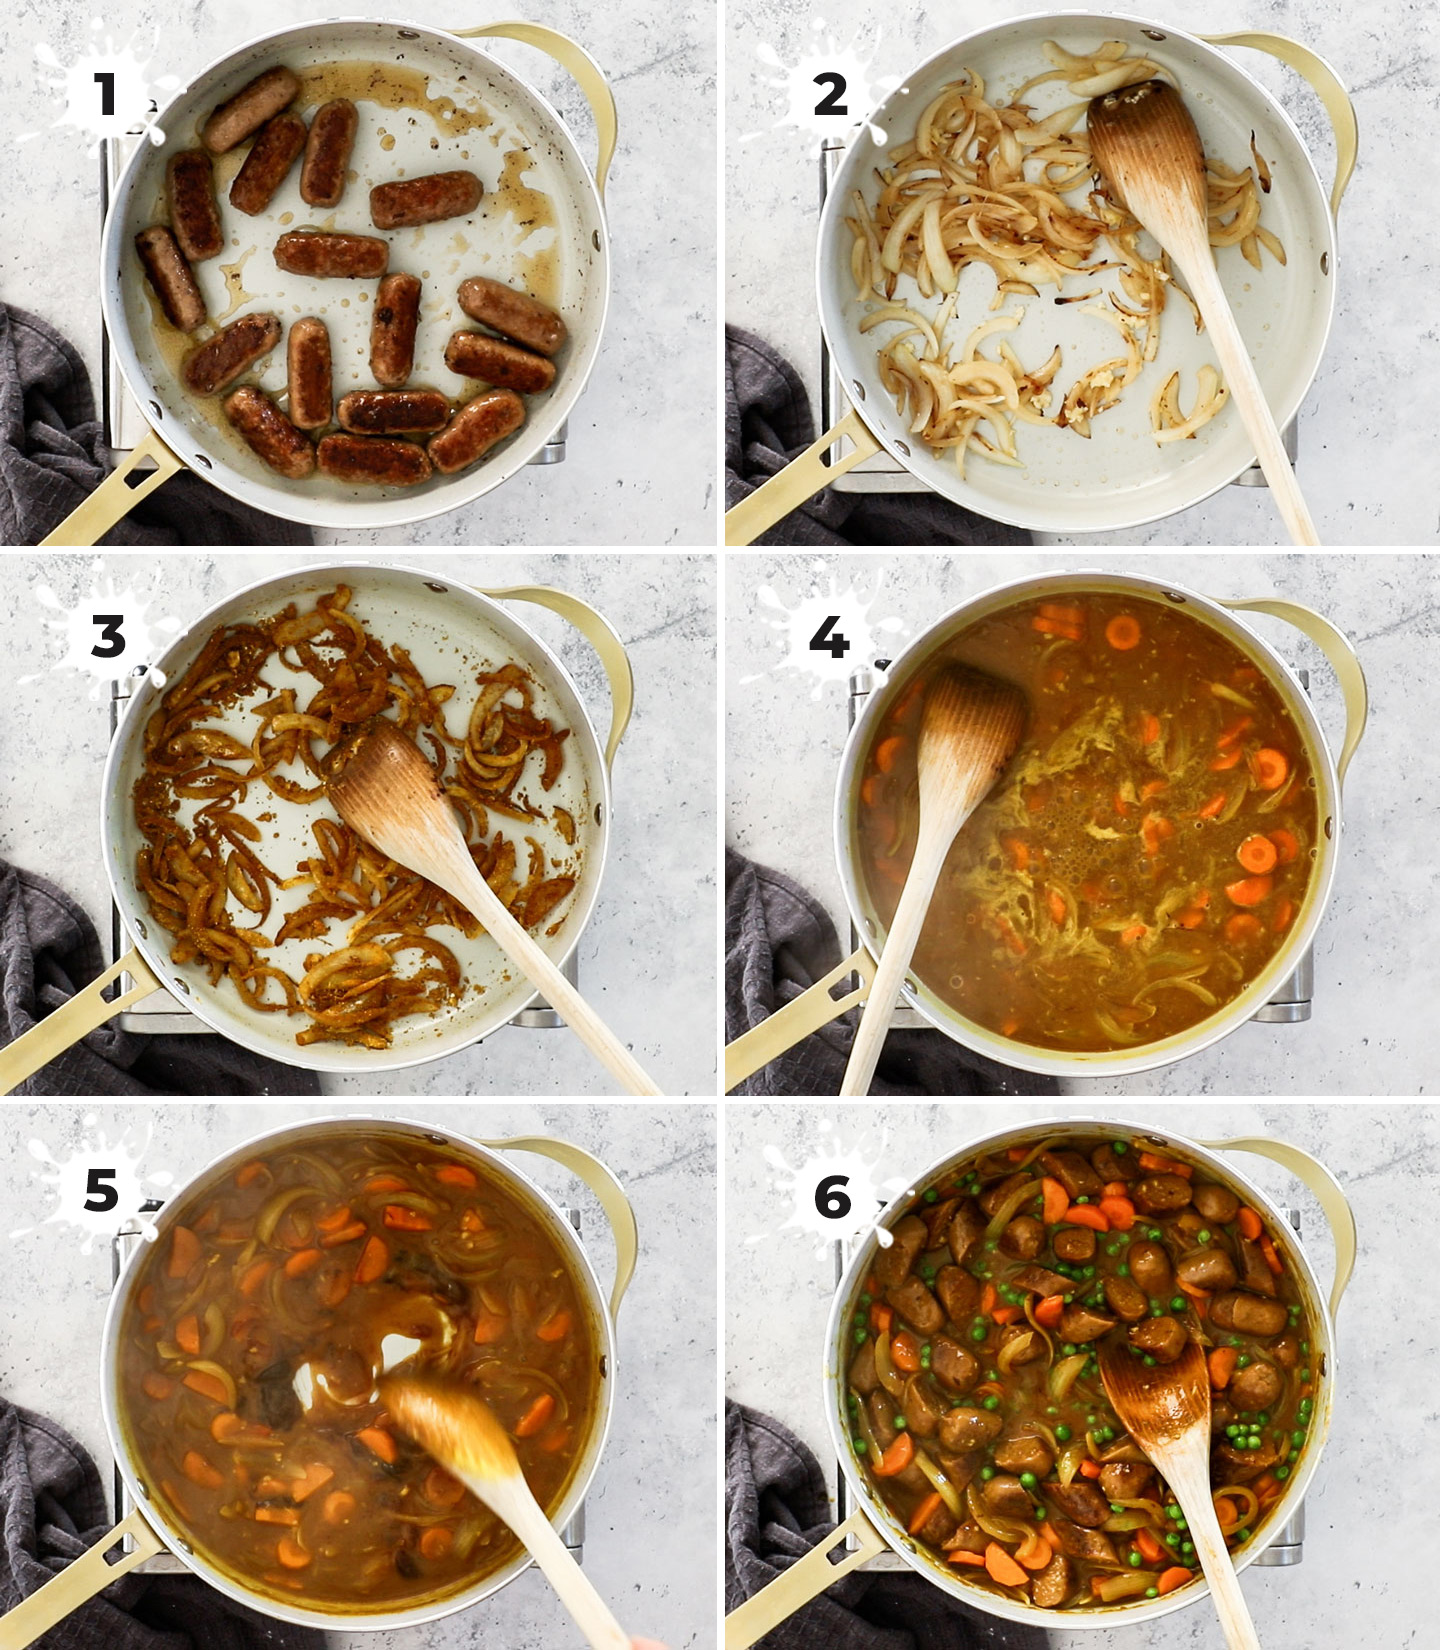 A collage showing the steps to make curried sausages.